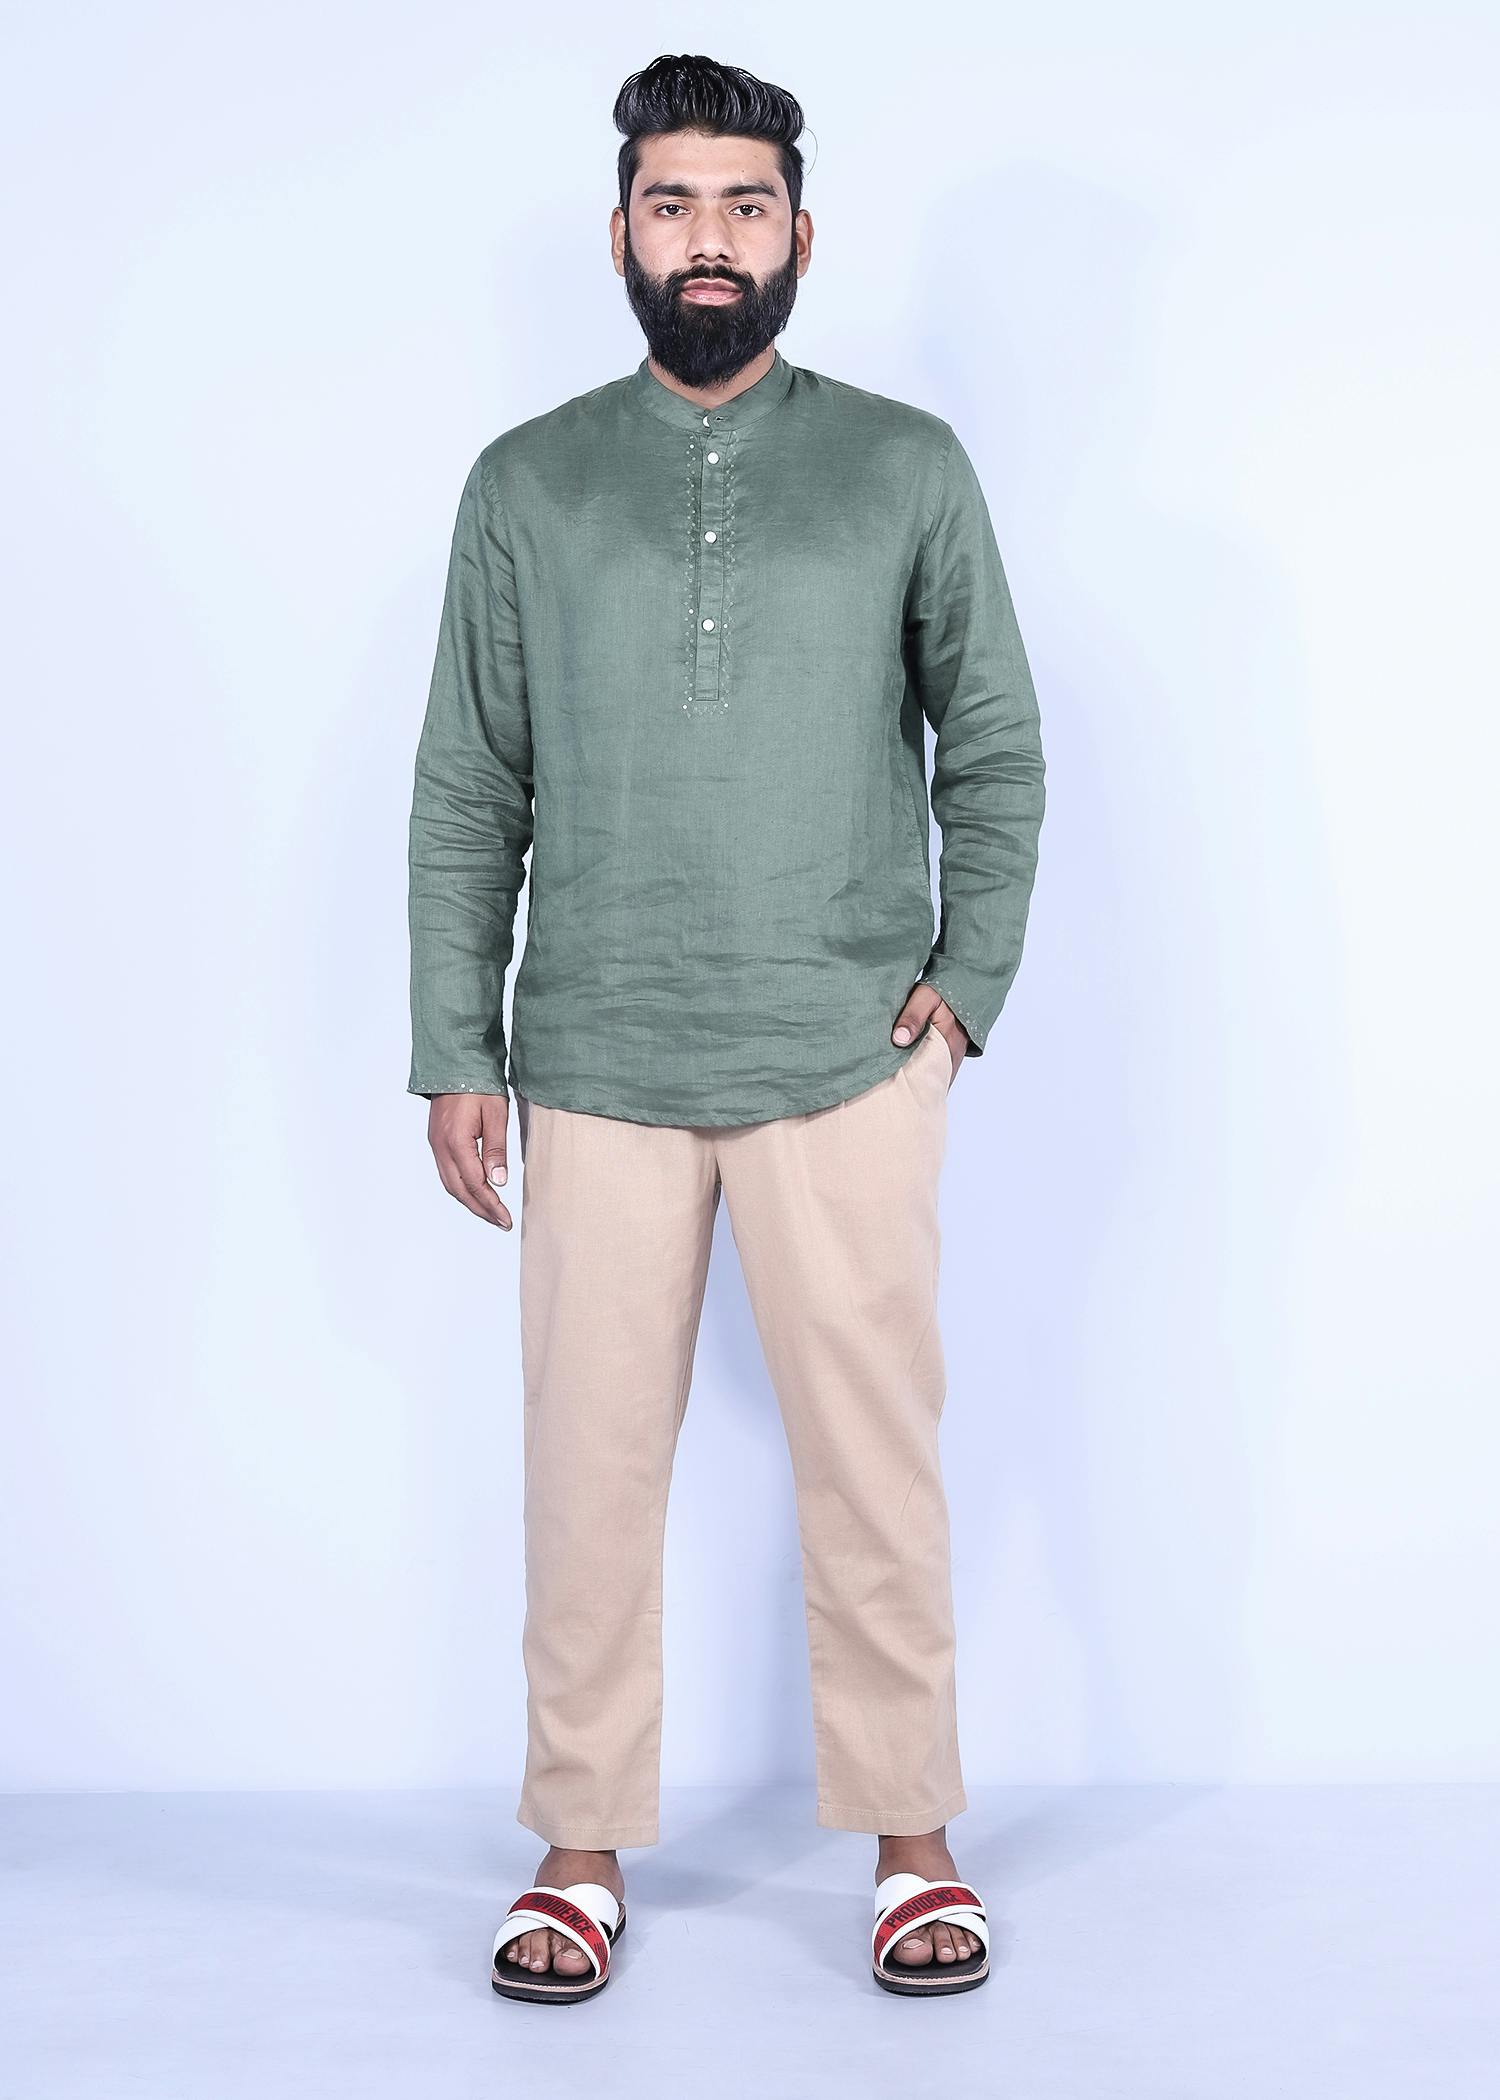 heron iv trouser beige color full front view